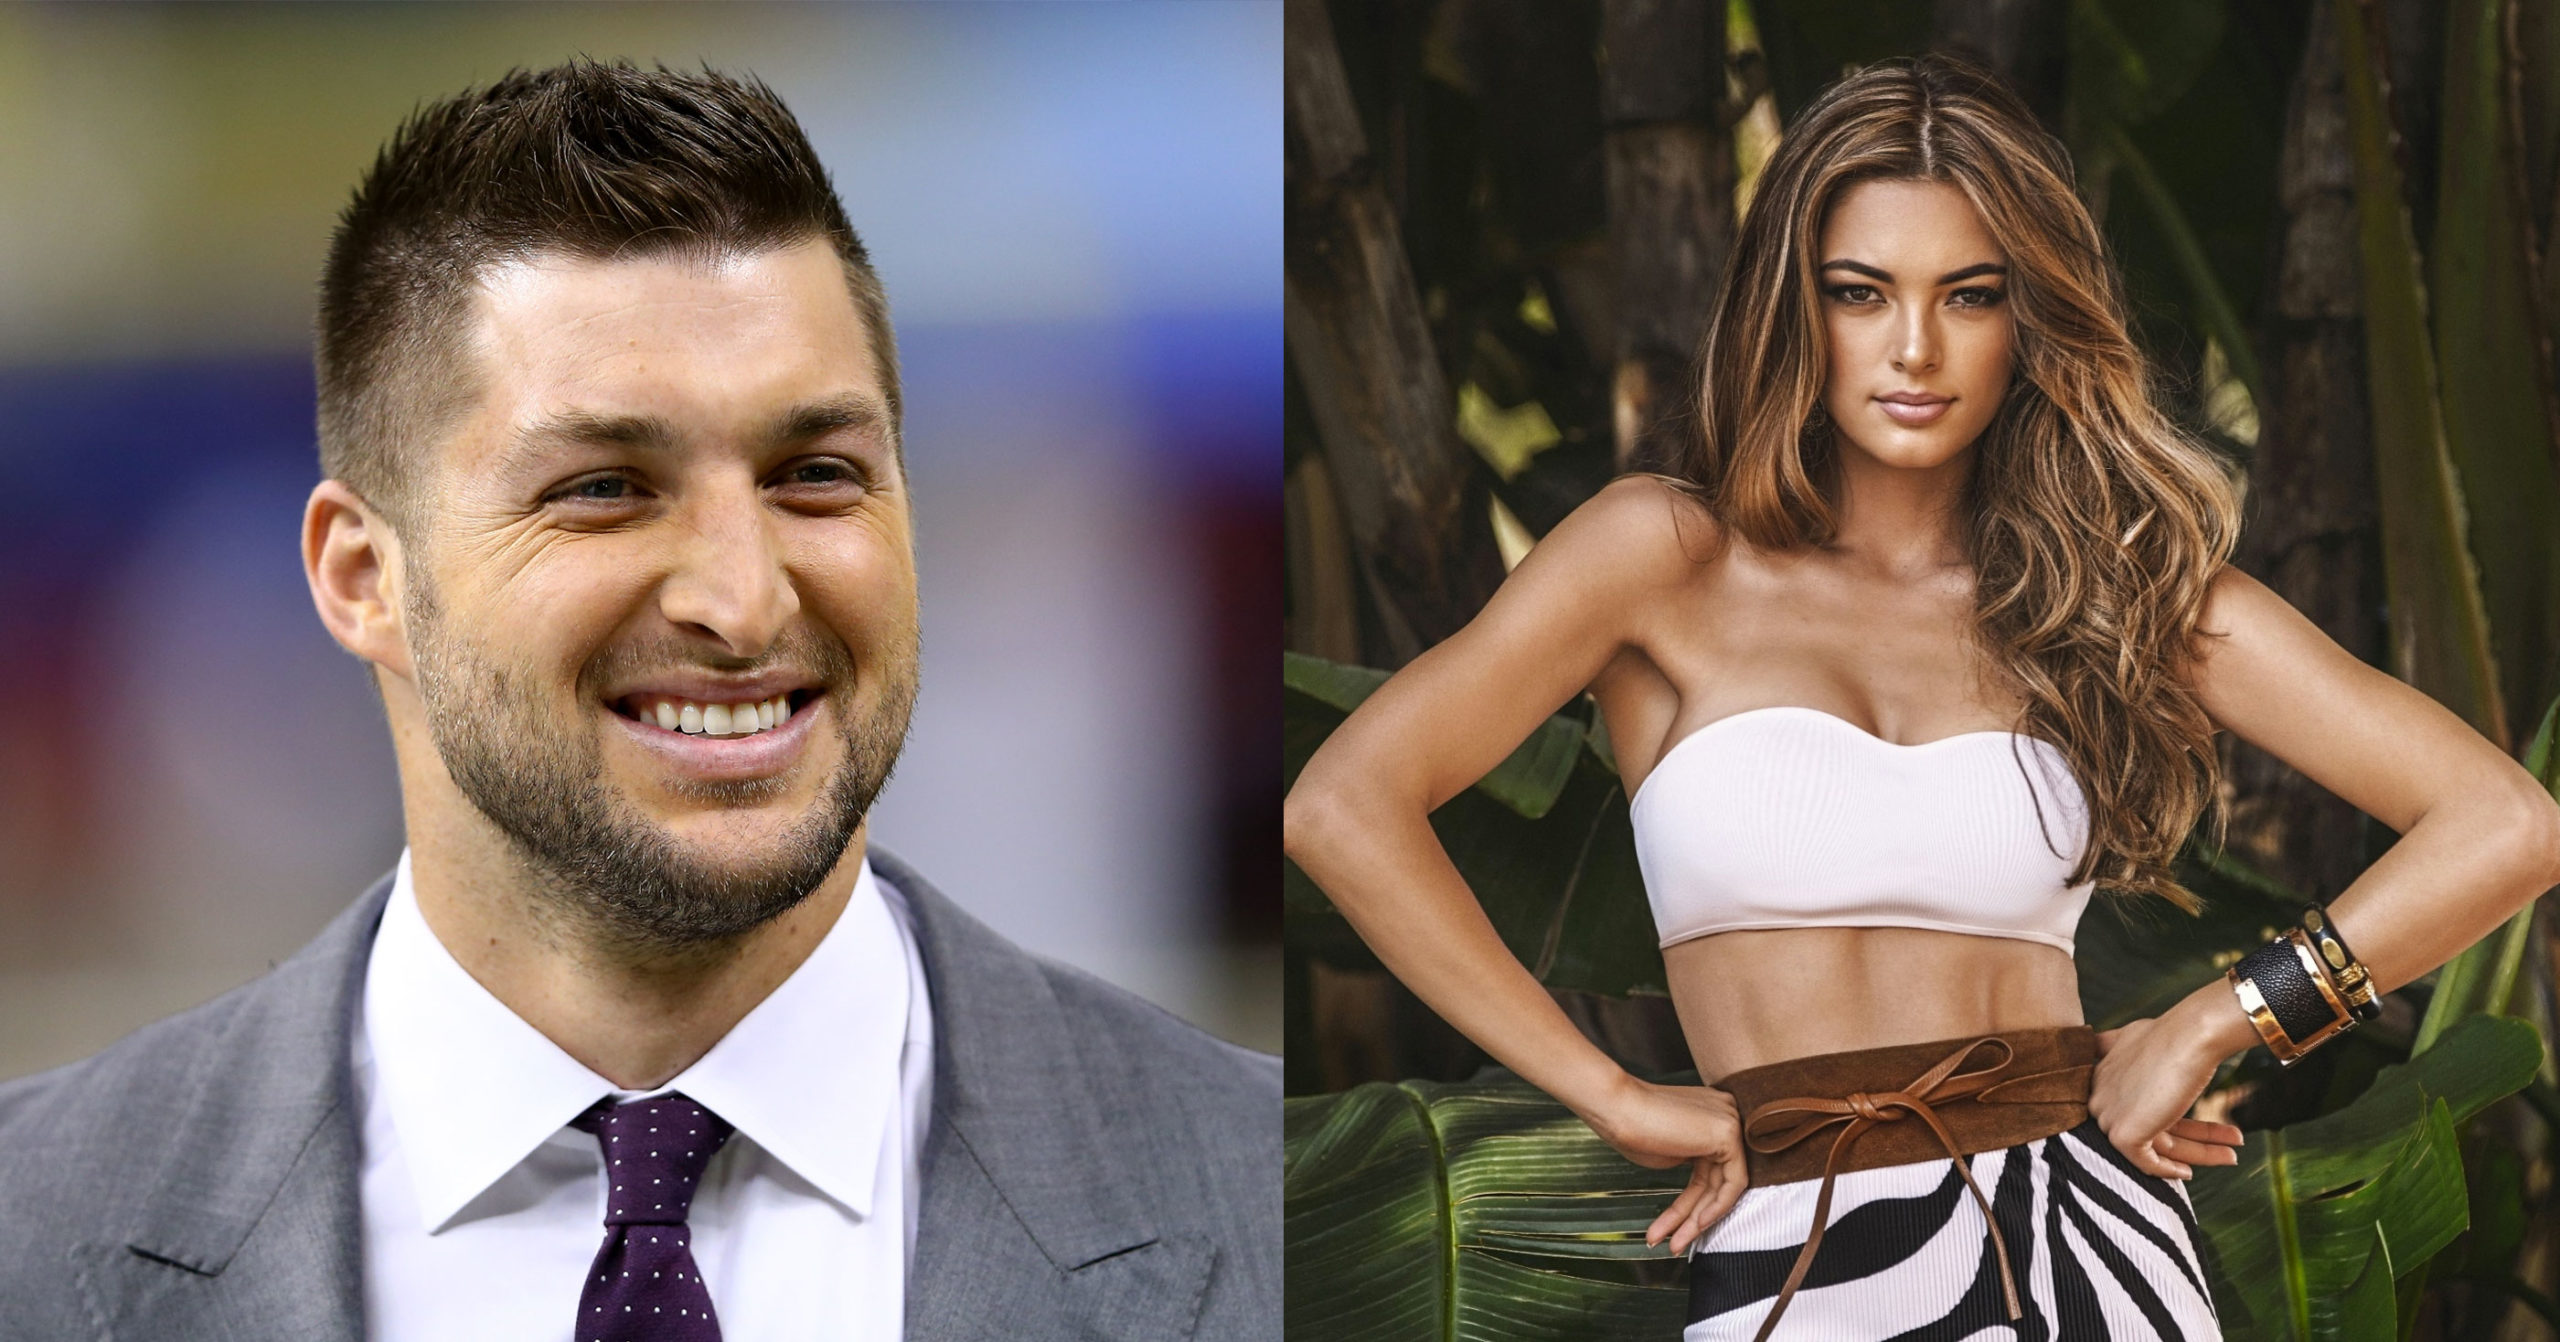 Tim Tebow Gets Engaged To Miss Universe Demi-Leigh Nel-Peters (PICS)